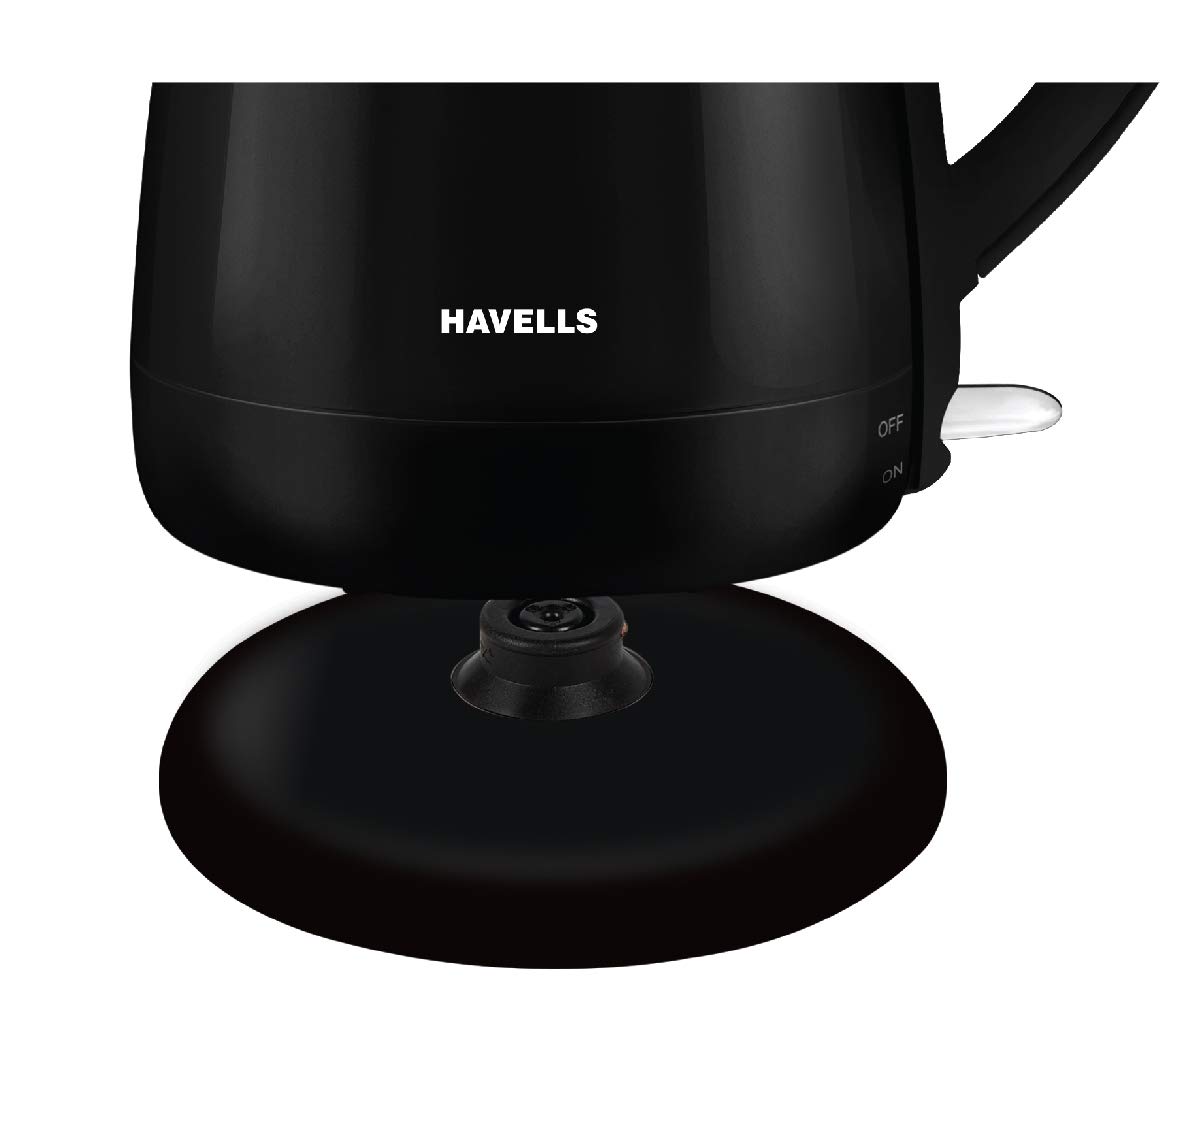 Havells Aqua Plus 1.2 litre Double Wall Kettle / 304 Stainless